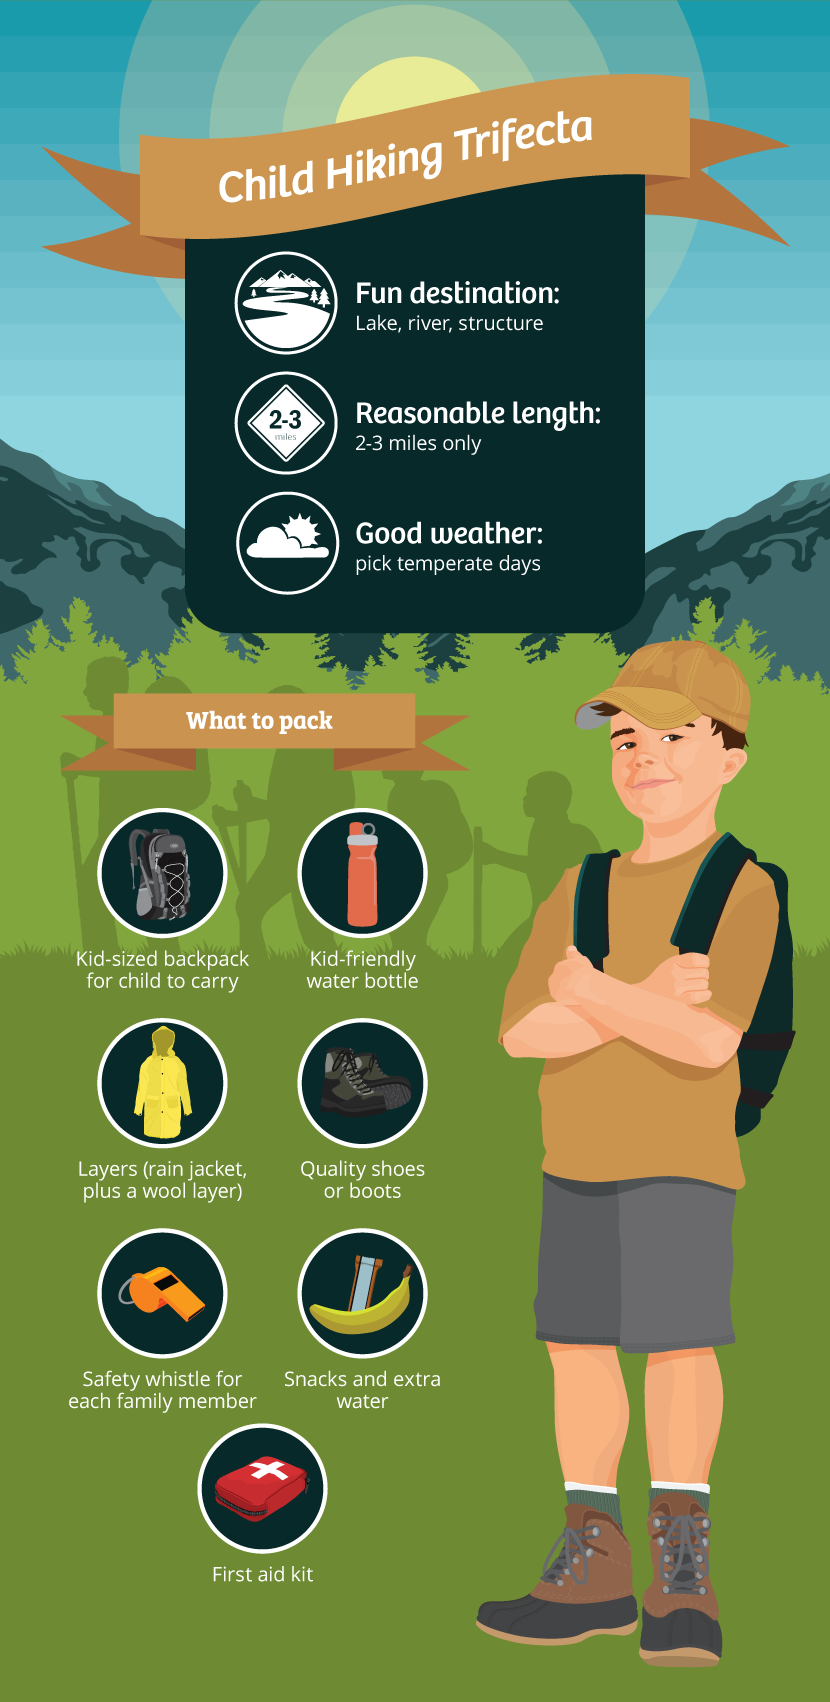 Child Hiking Trifecta - The Benefits of Hiking with Kids